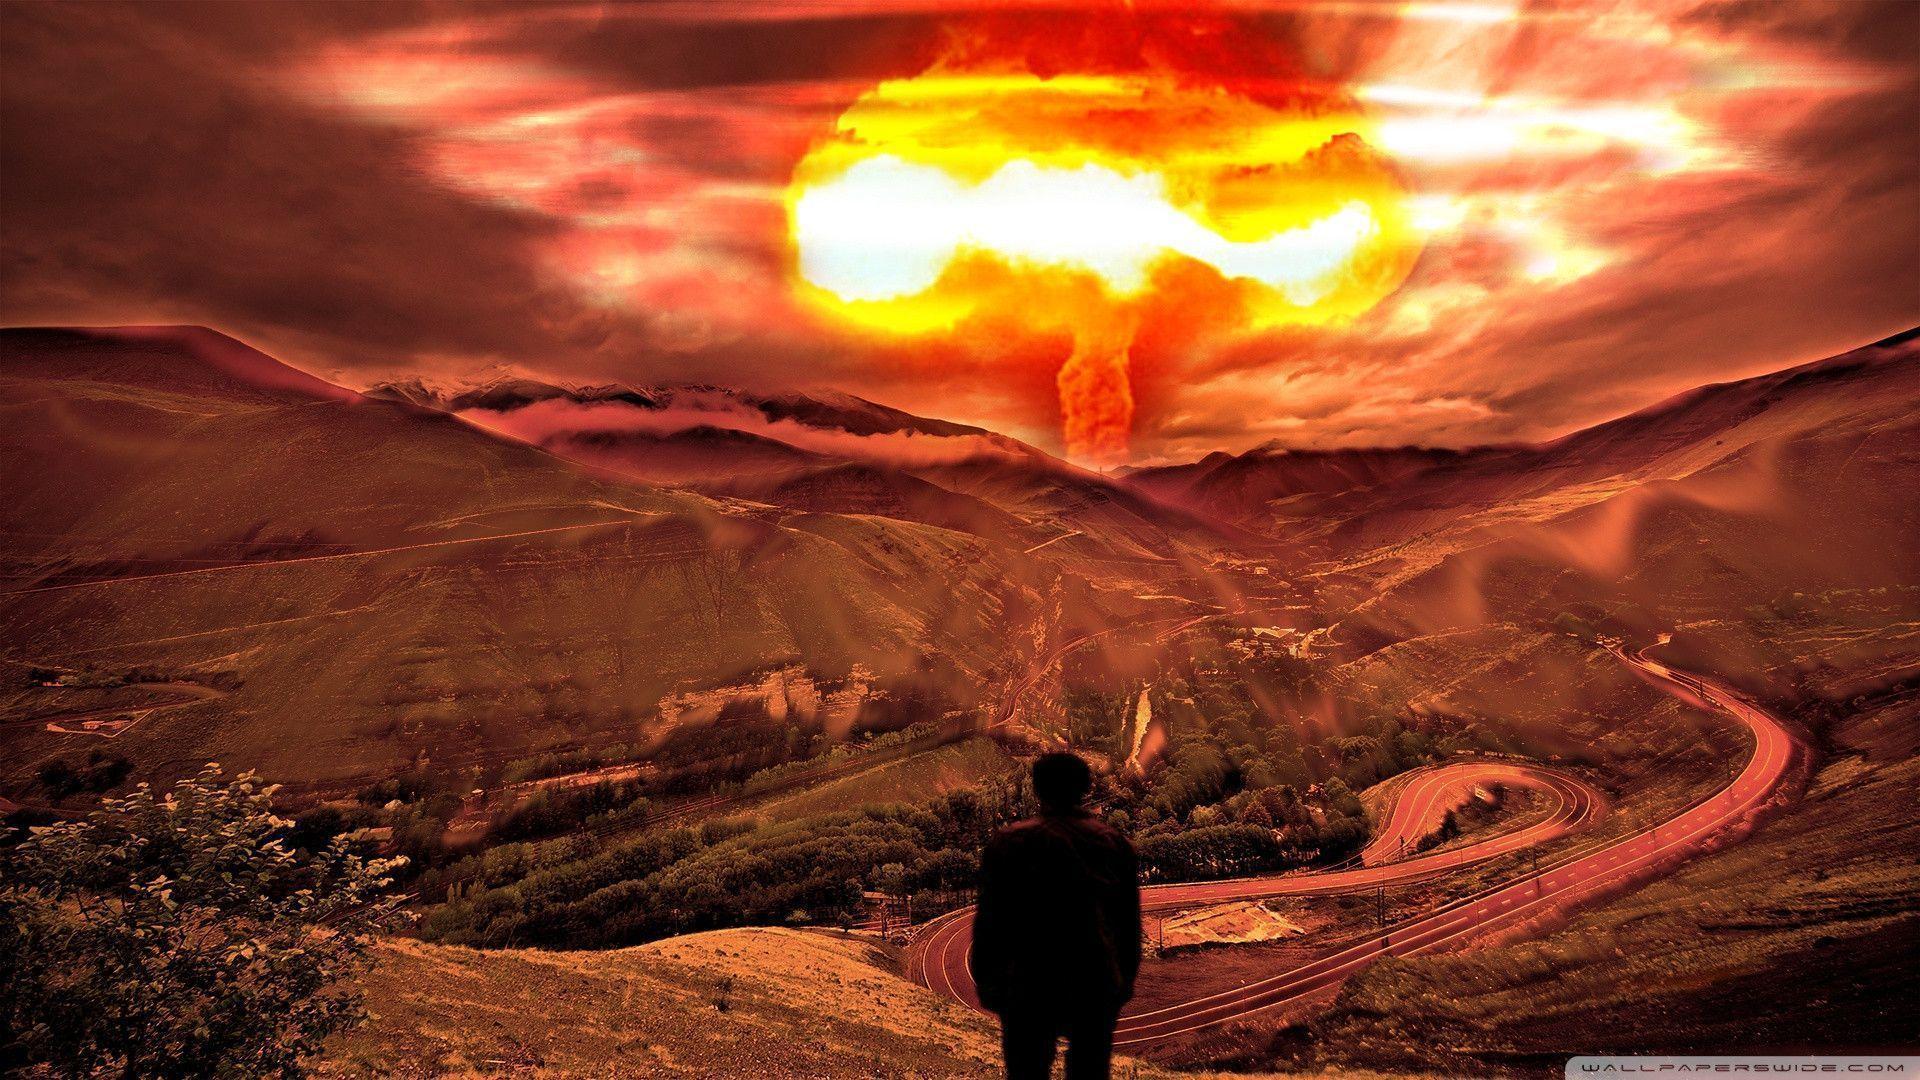 Wallpapers For > Nuclear Explosion Wallpapers 1920x1080